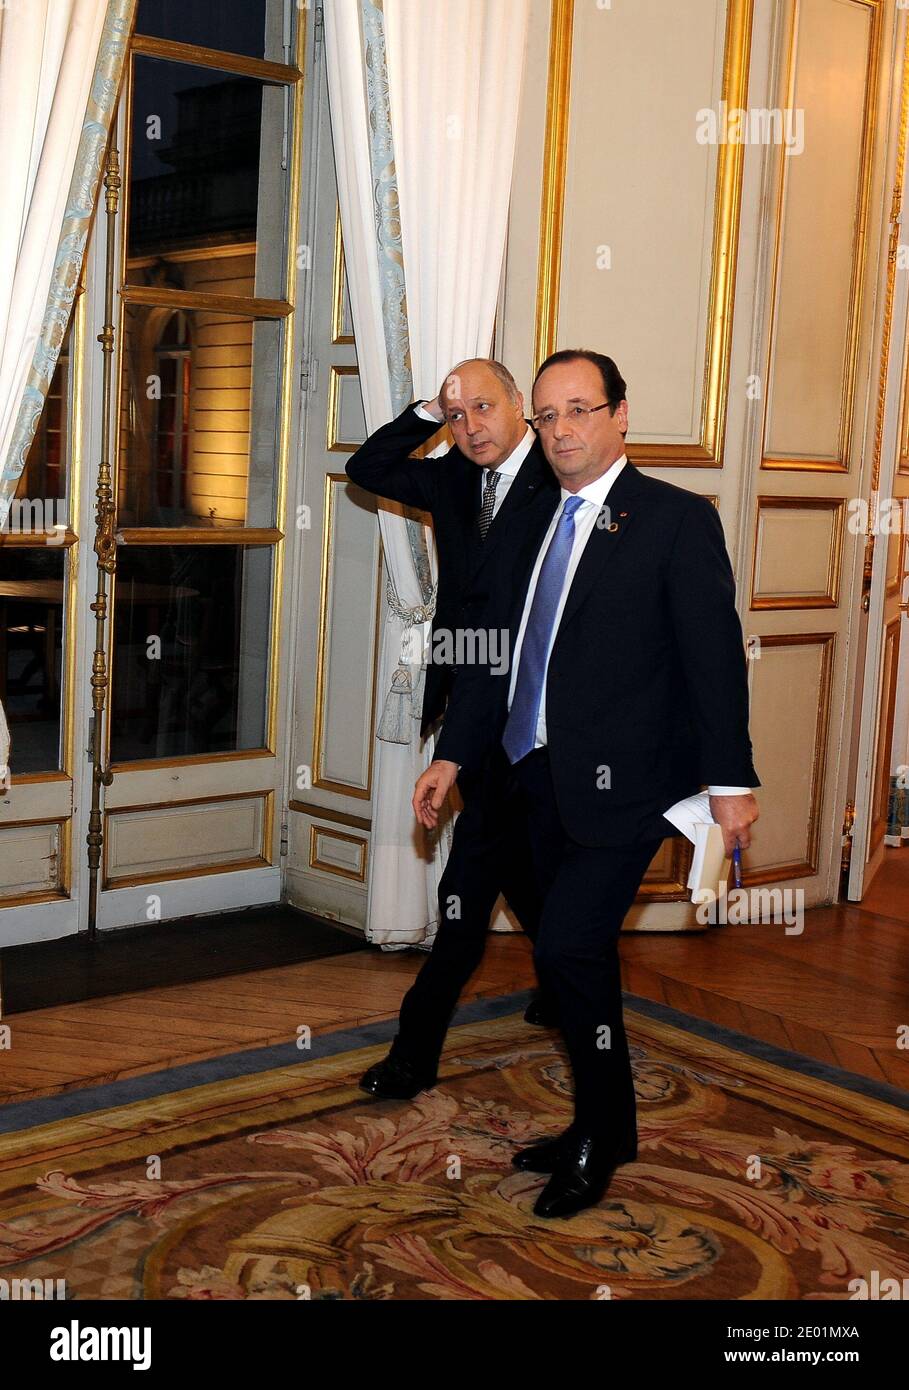 French President Francois Hollande (C) arrives alongside the French Minister of Foreign Affairs Laurent Fabius for a meeting dedicated to the situation in the Central African Republic, as part of a Summit for peace and safety in Africa at the Elysee presidential palace, in Paris, France, on December 7, 2013. Hollande on December 6 told African leaders it is time for their continent to take charge of its own security as a major summit went ahead against the sombre backdrop of the mourning for late former South African president Nelson Mandela. Photo by Mousse/ABACAPRESS.COM Stock Photo